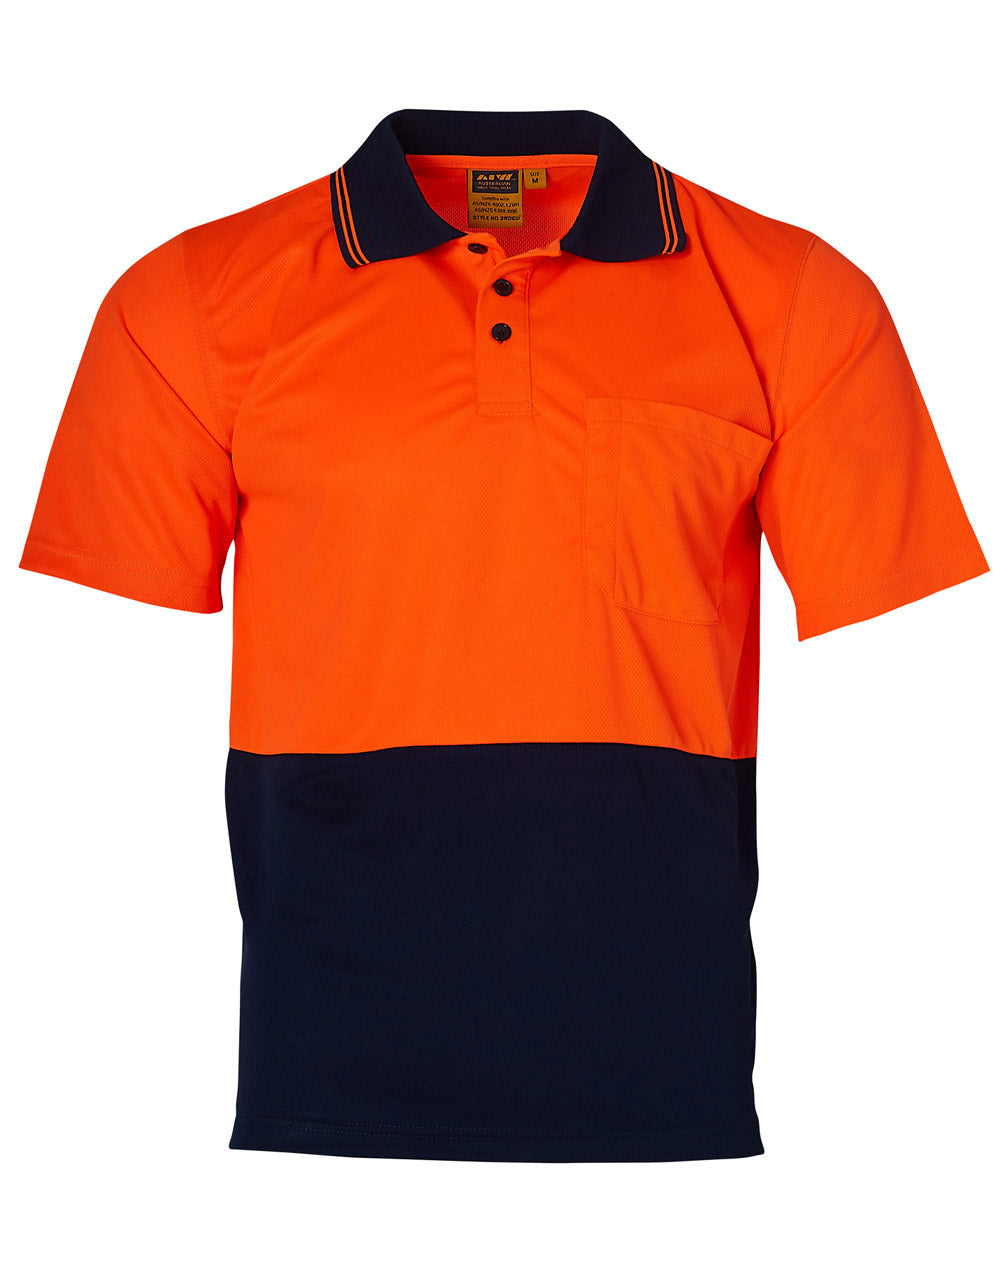 Hivis Short Sleeve Truedry Polo Shirt - made by AIW